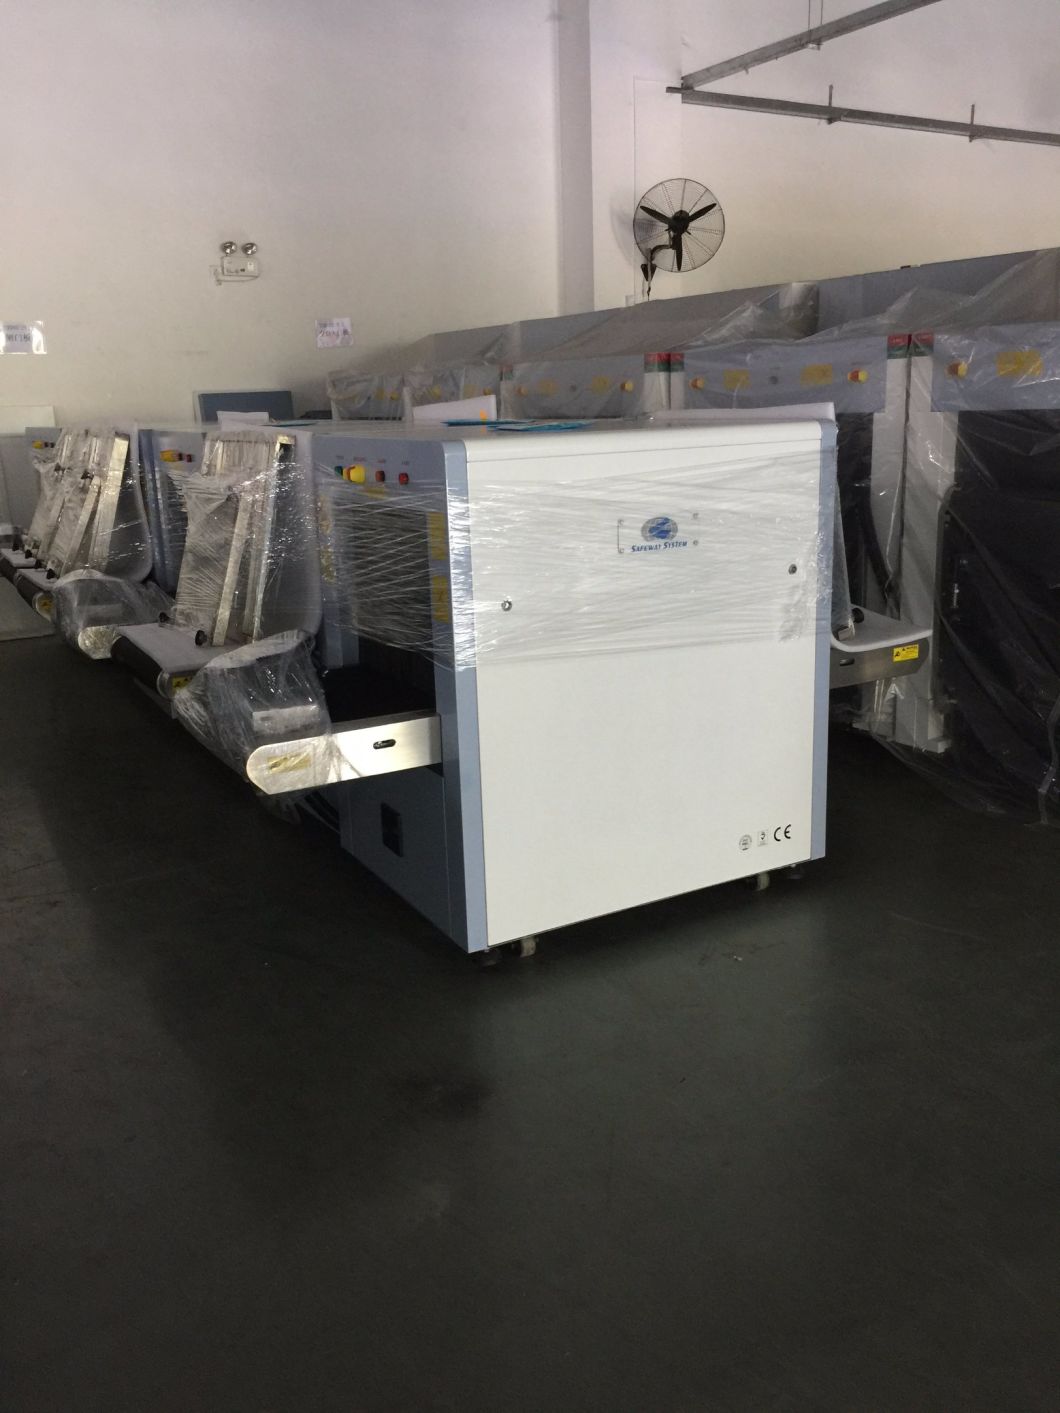 Luggag X Ray Machine Screening Equipment At6550 Parcel Scanner Security Machine